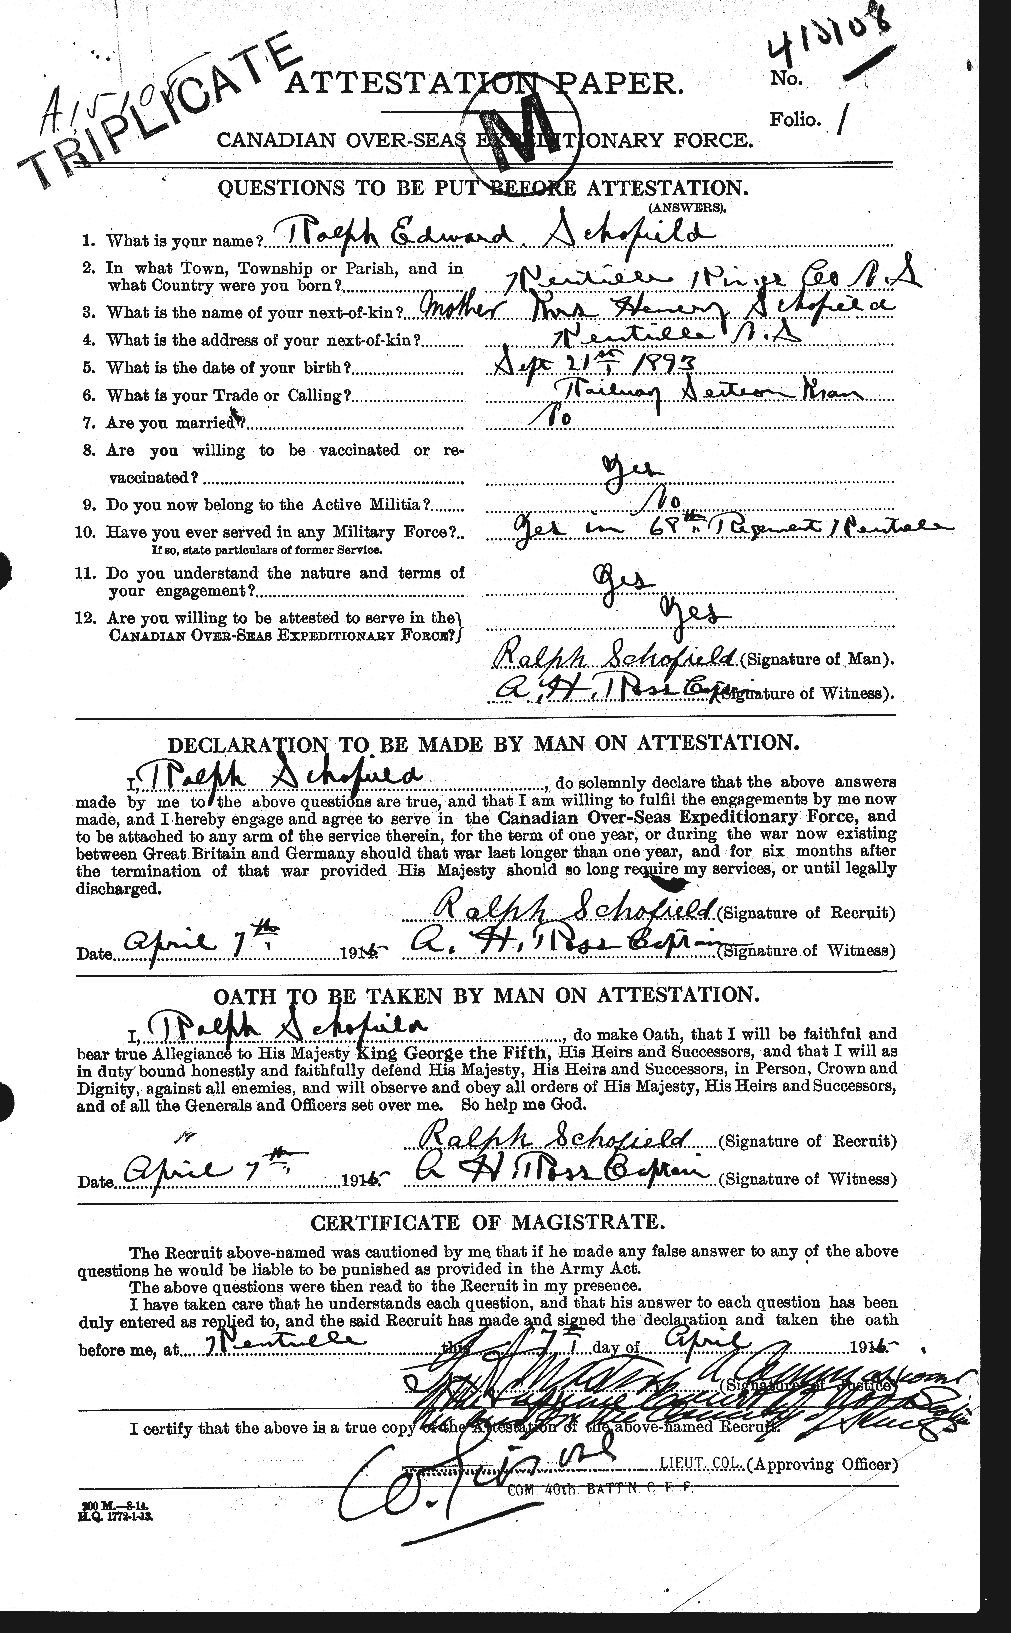 Personnel Records of the First World War - CEF 081064a